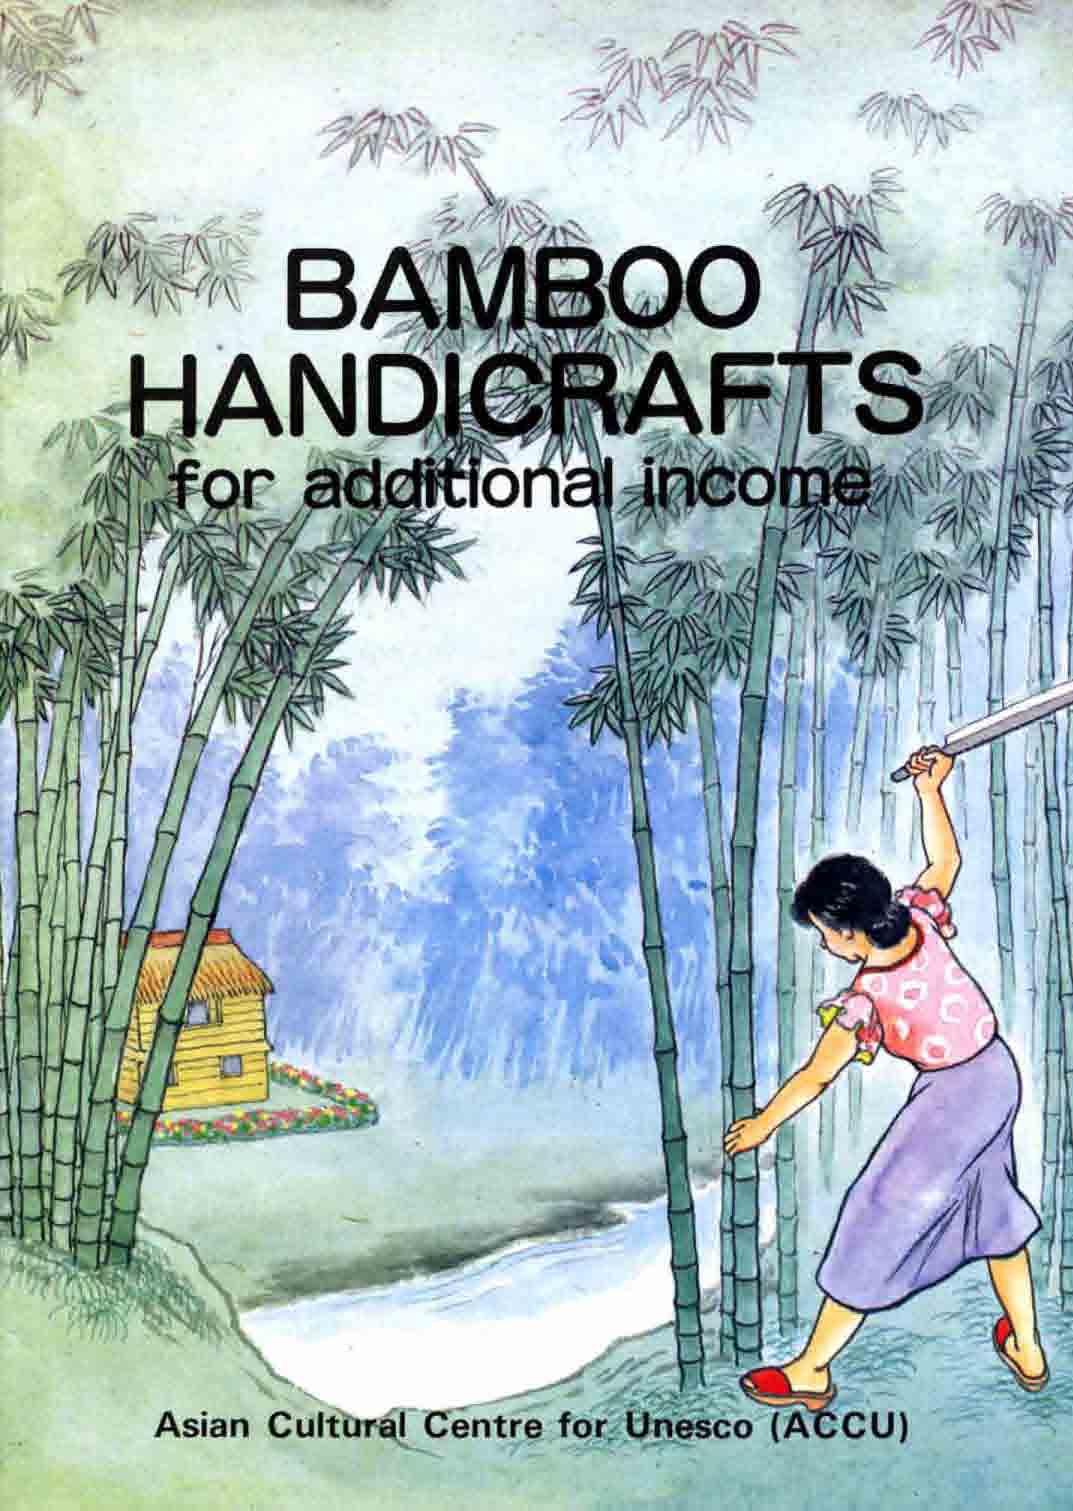 Bamboo Handicrafts for additional income